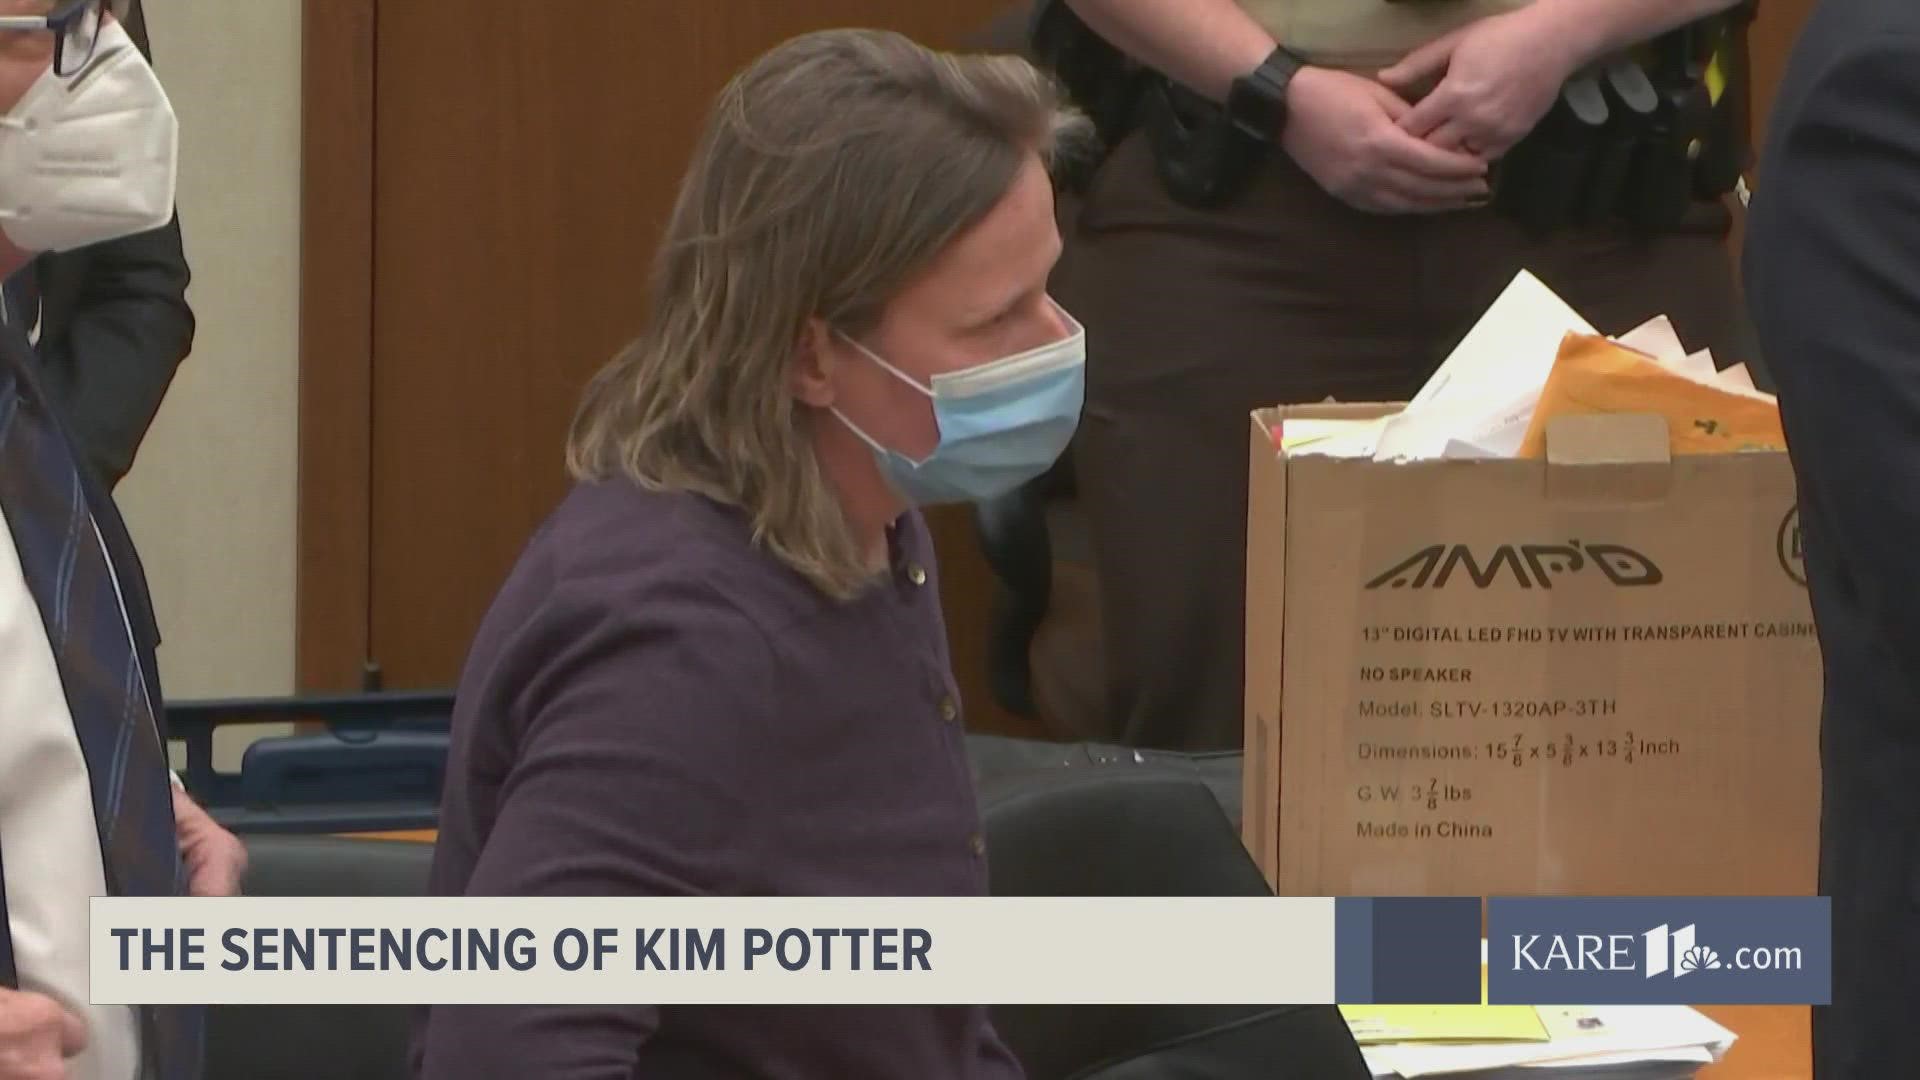 Judge Regina Chu sentences former police officer Kim Potter to 24 months in prison, of which she will likely serve 16 months.